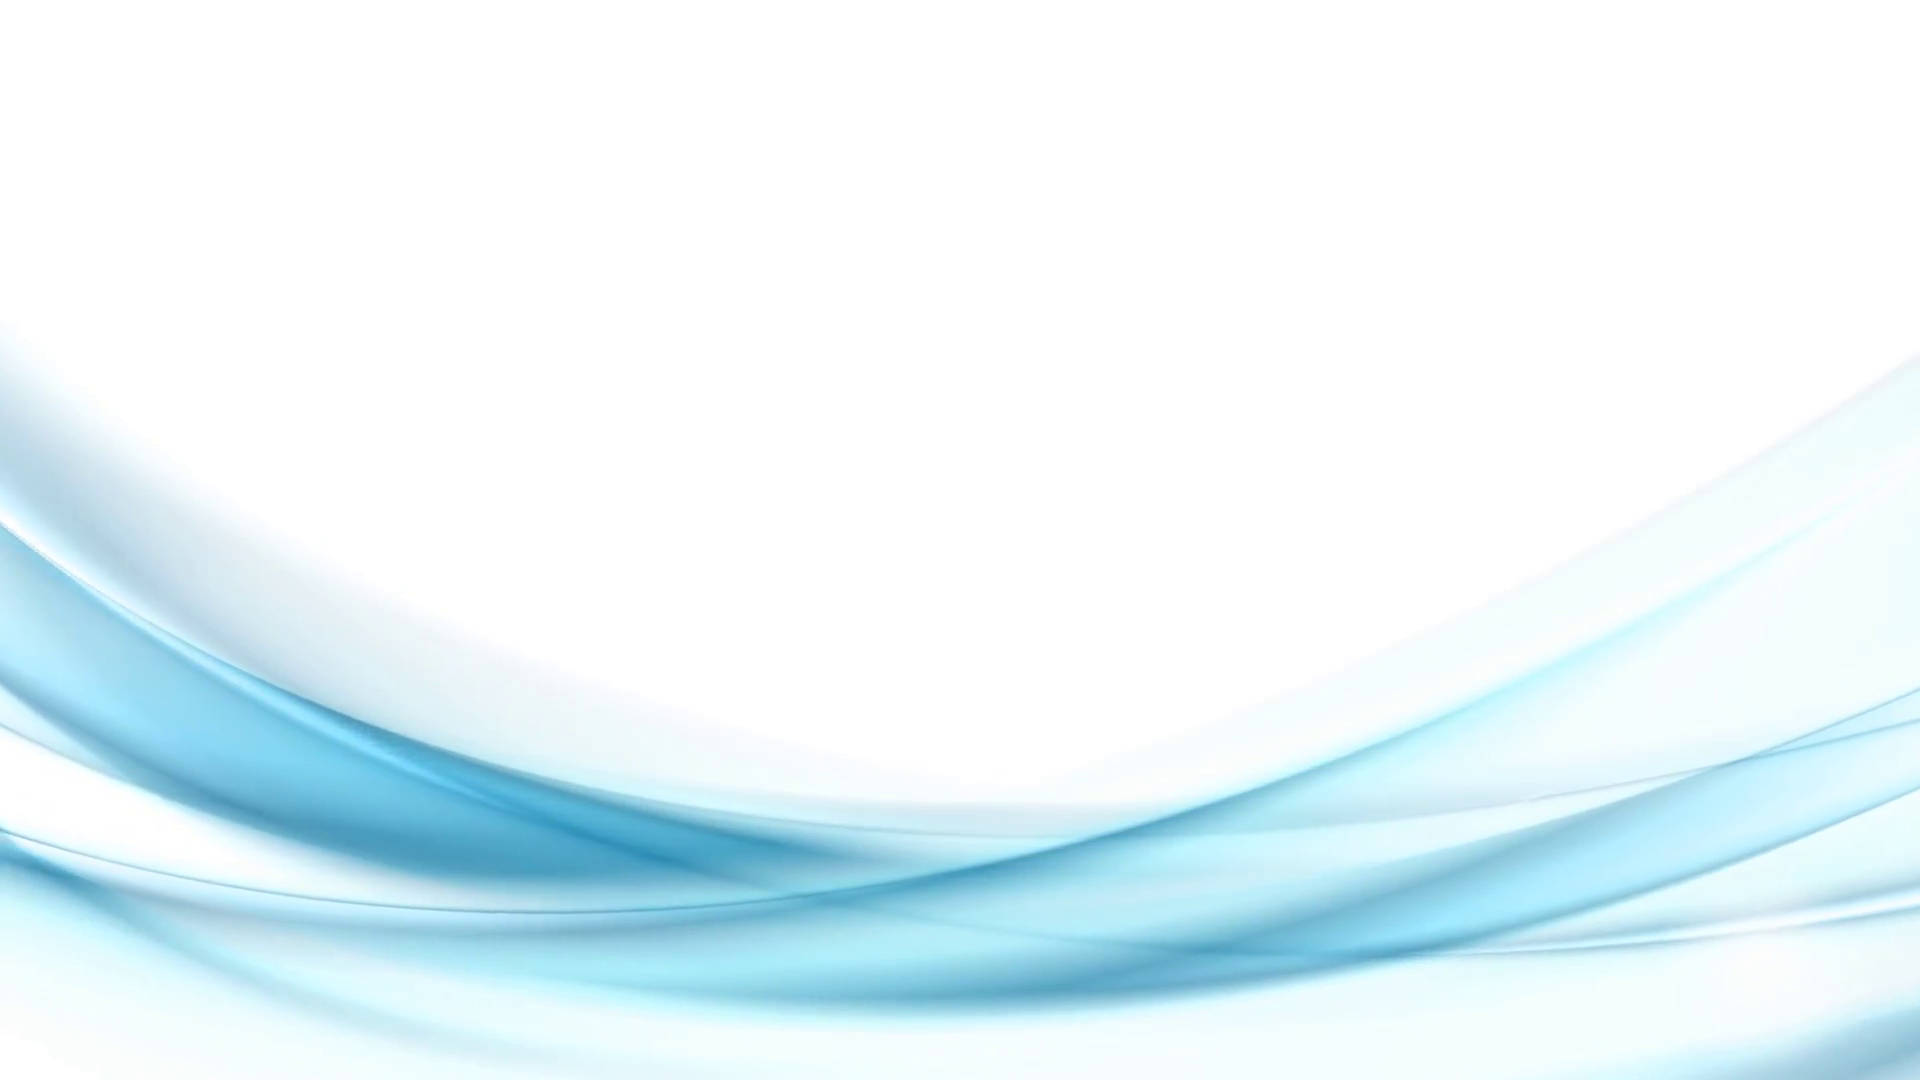 Wave Background PNG - 166088